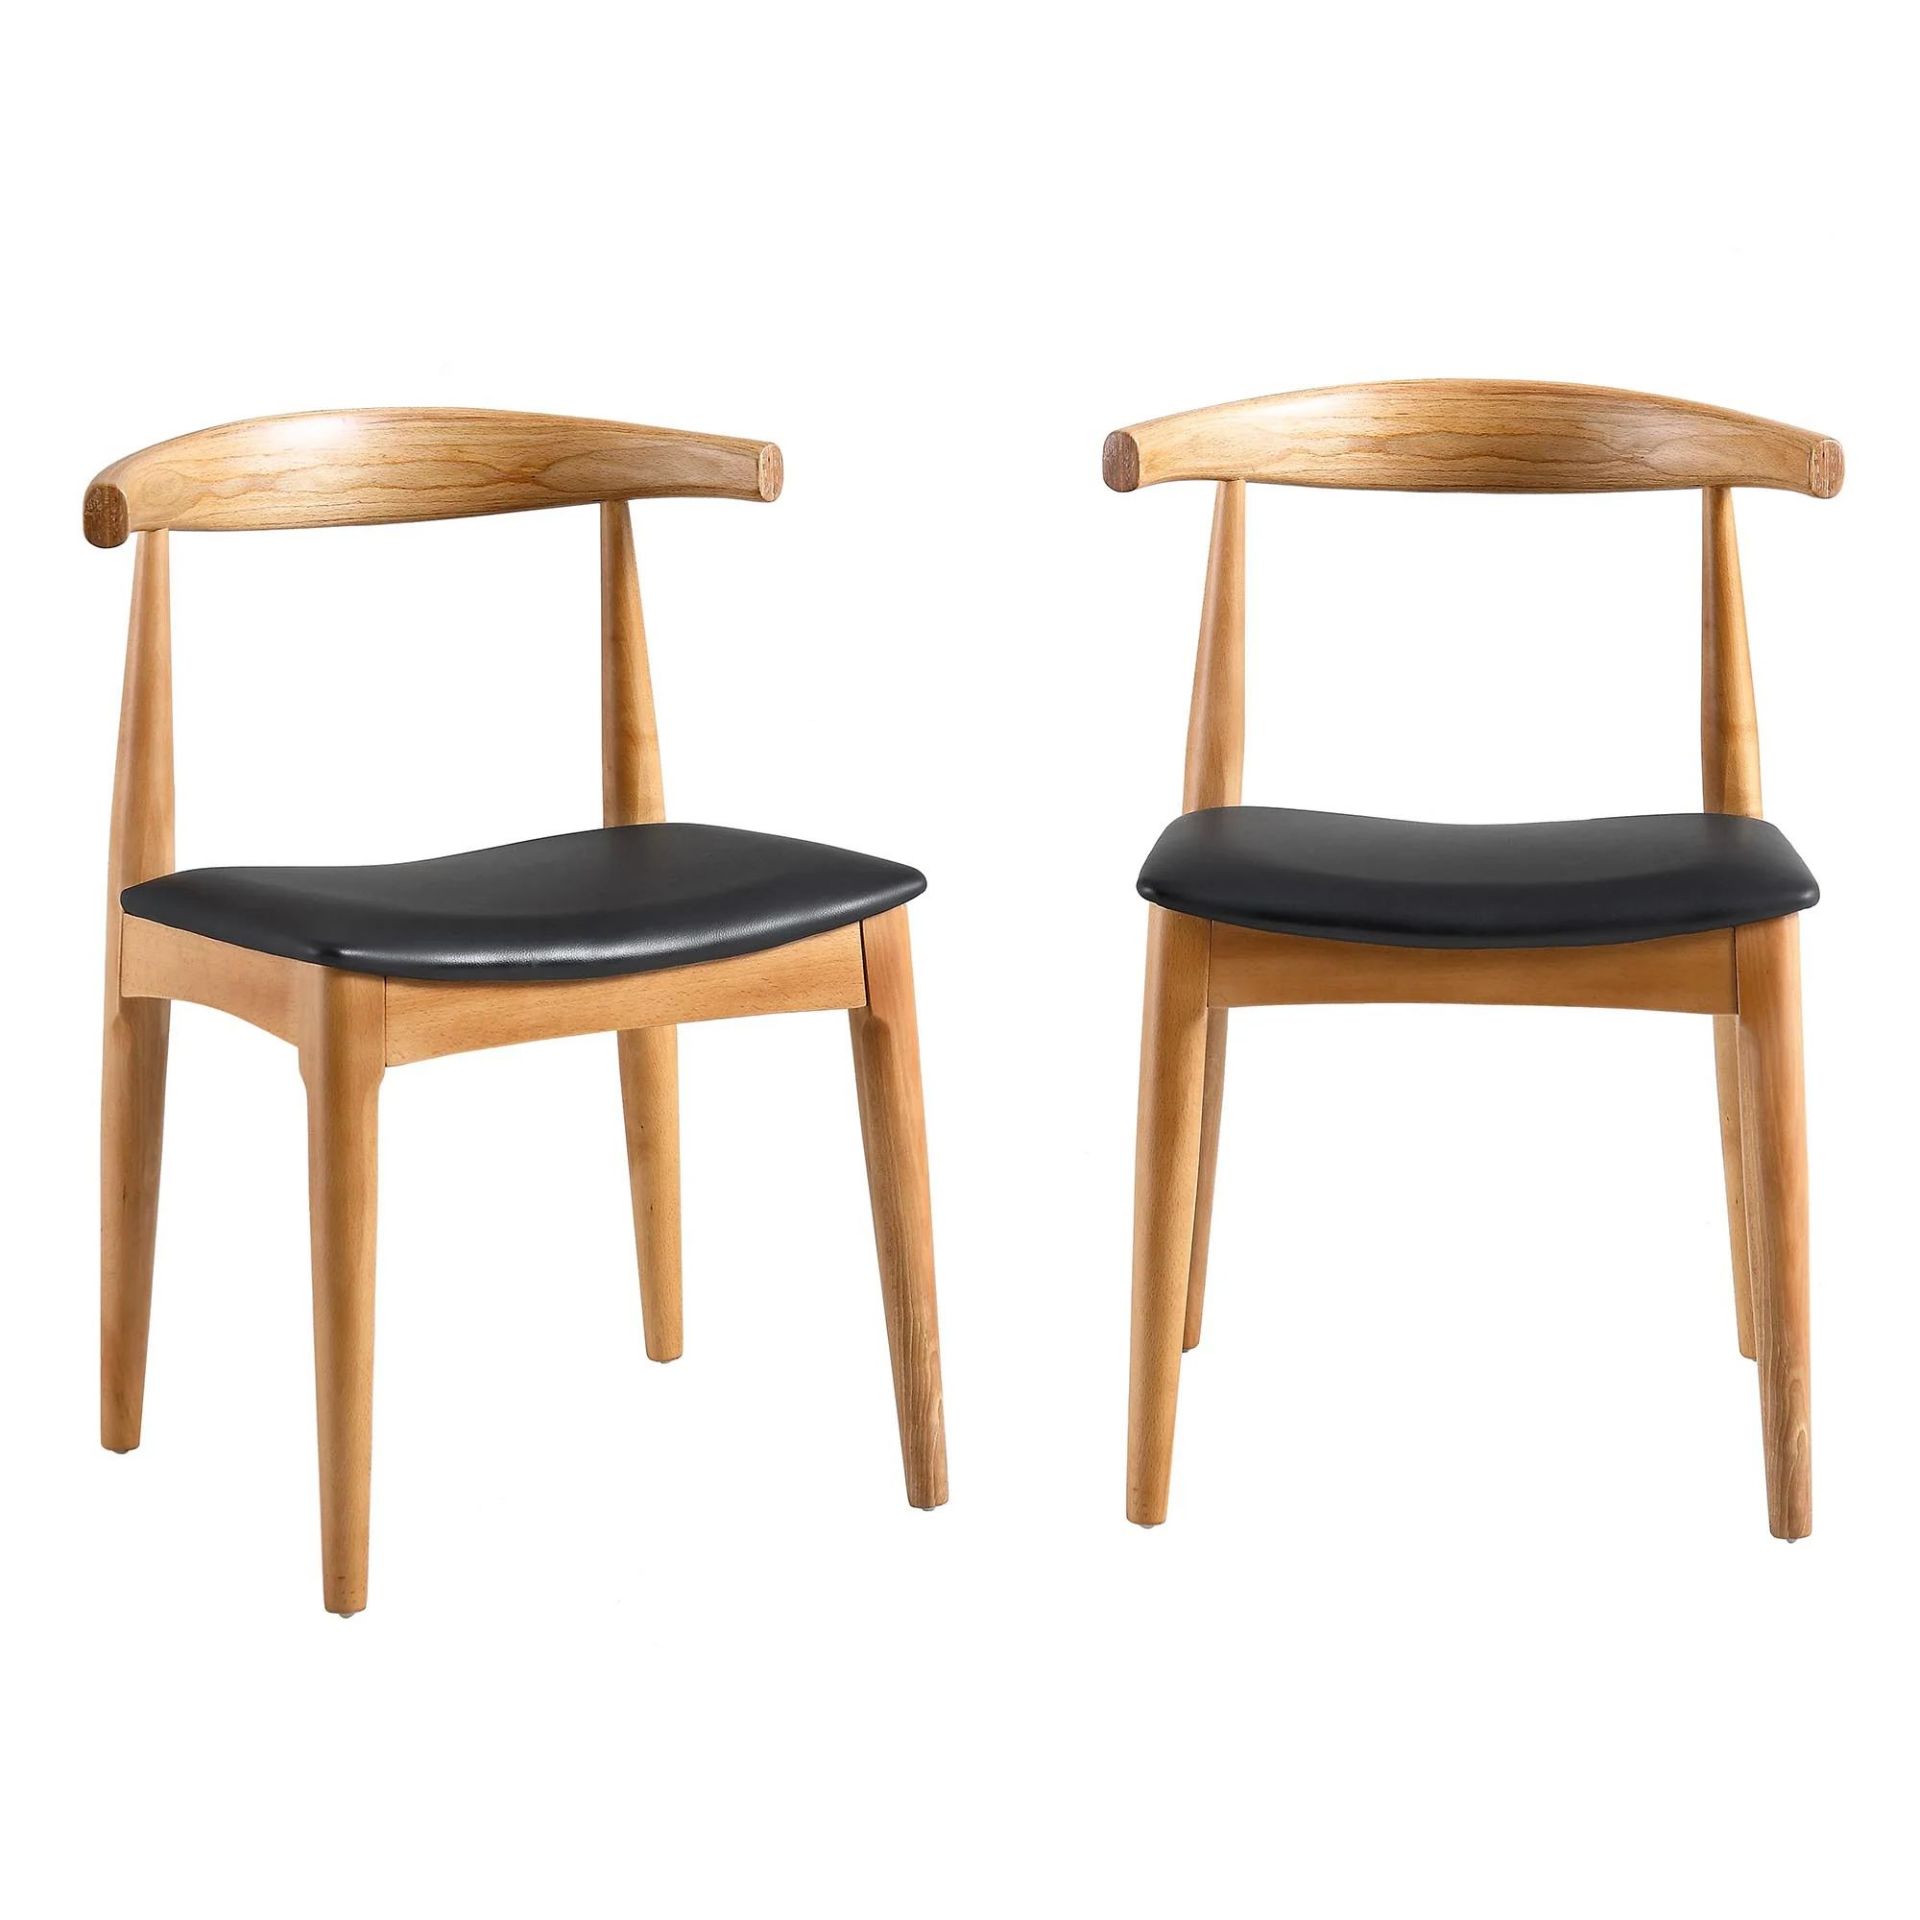 Arley Set of 2 Beech Wood Dining Chairs, Natural and Black. - R14. RRP £289.99. The wood frame is - Bild 2 aus 2